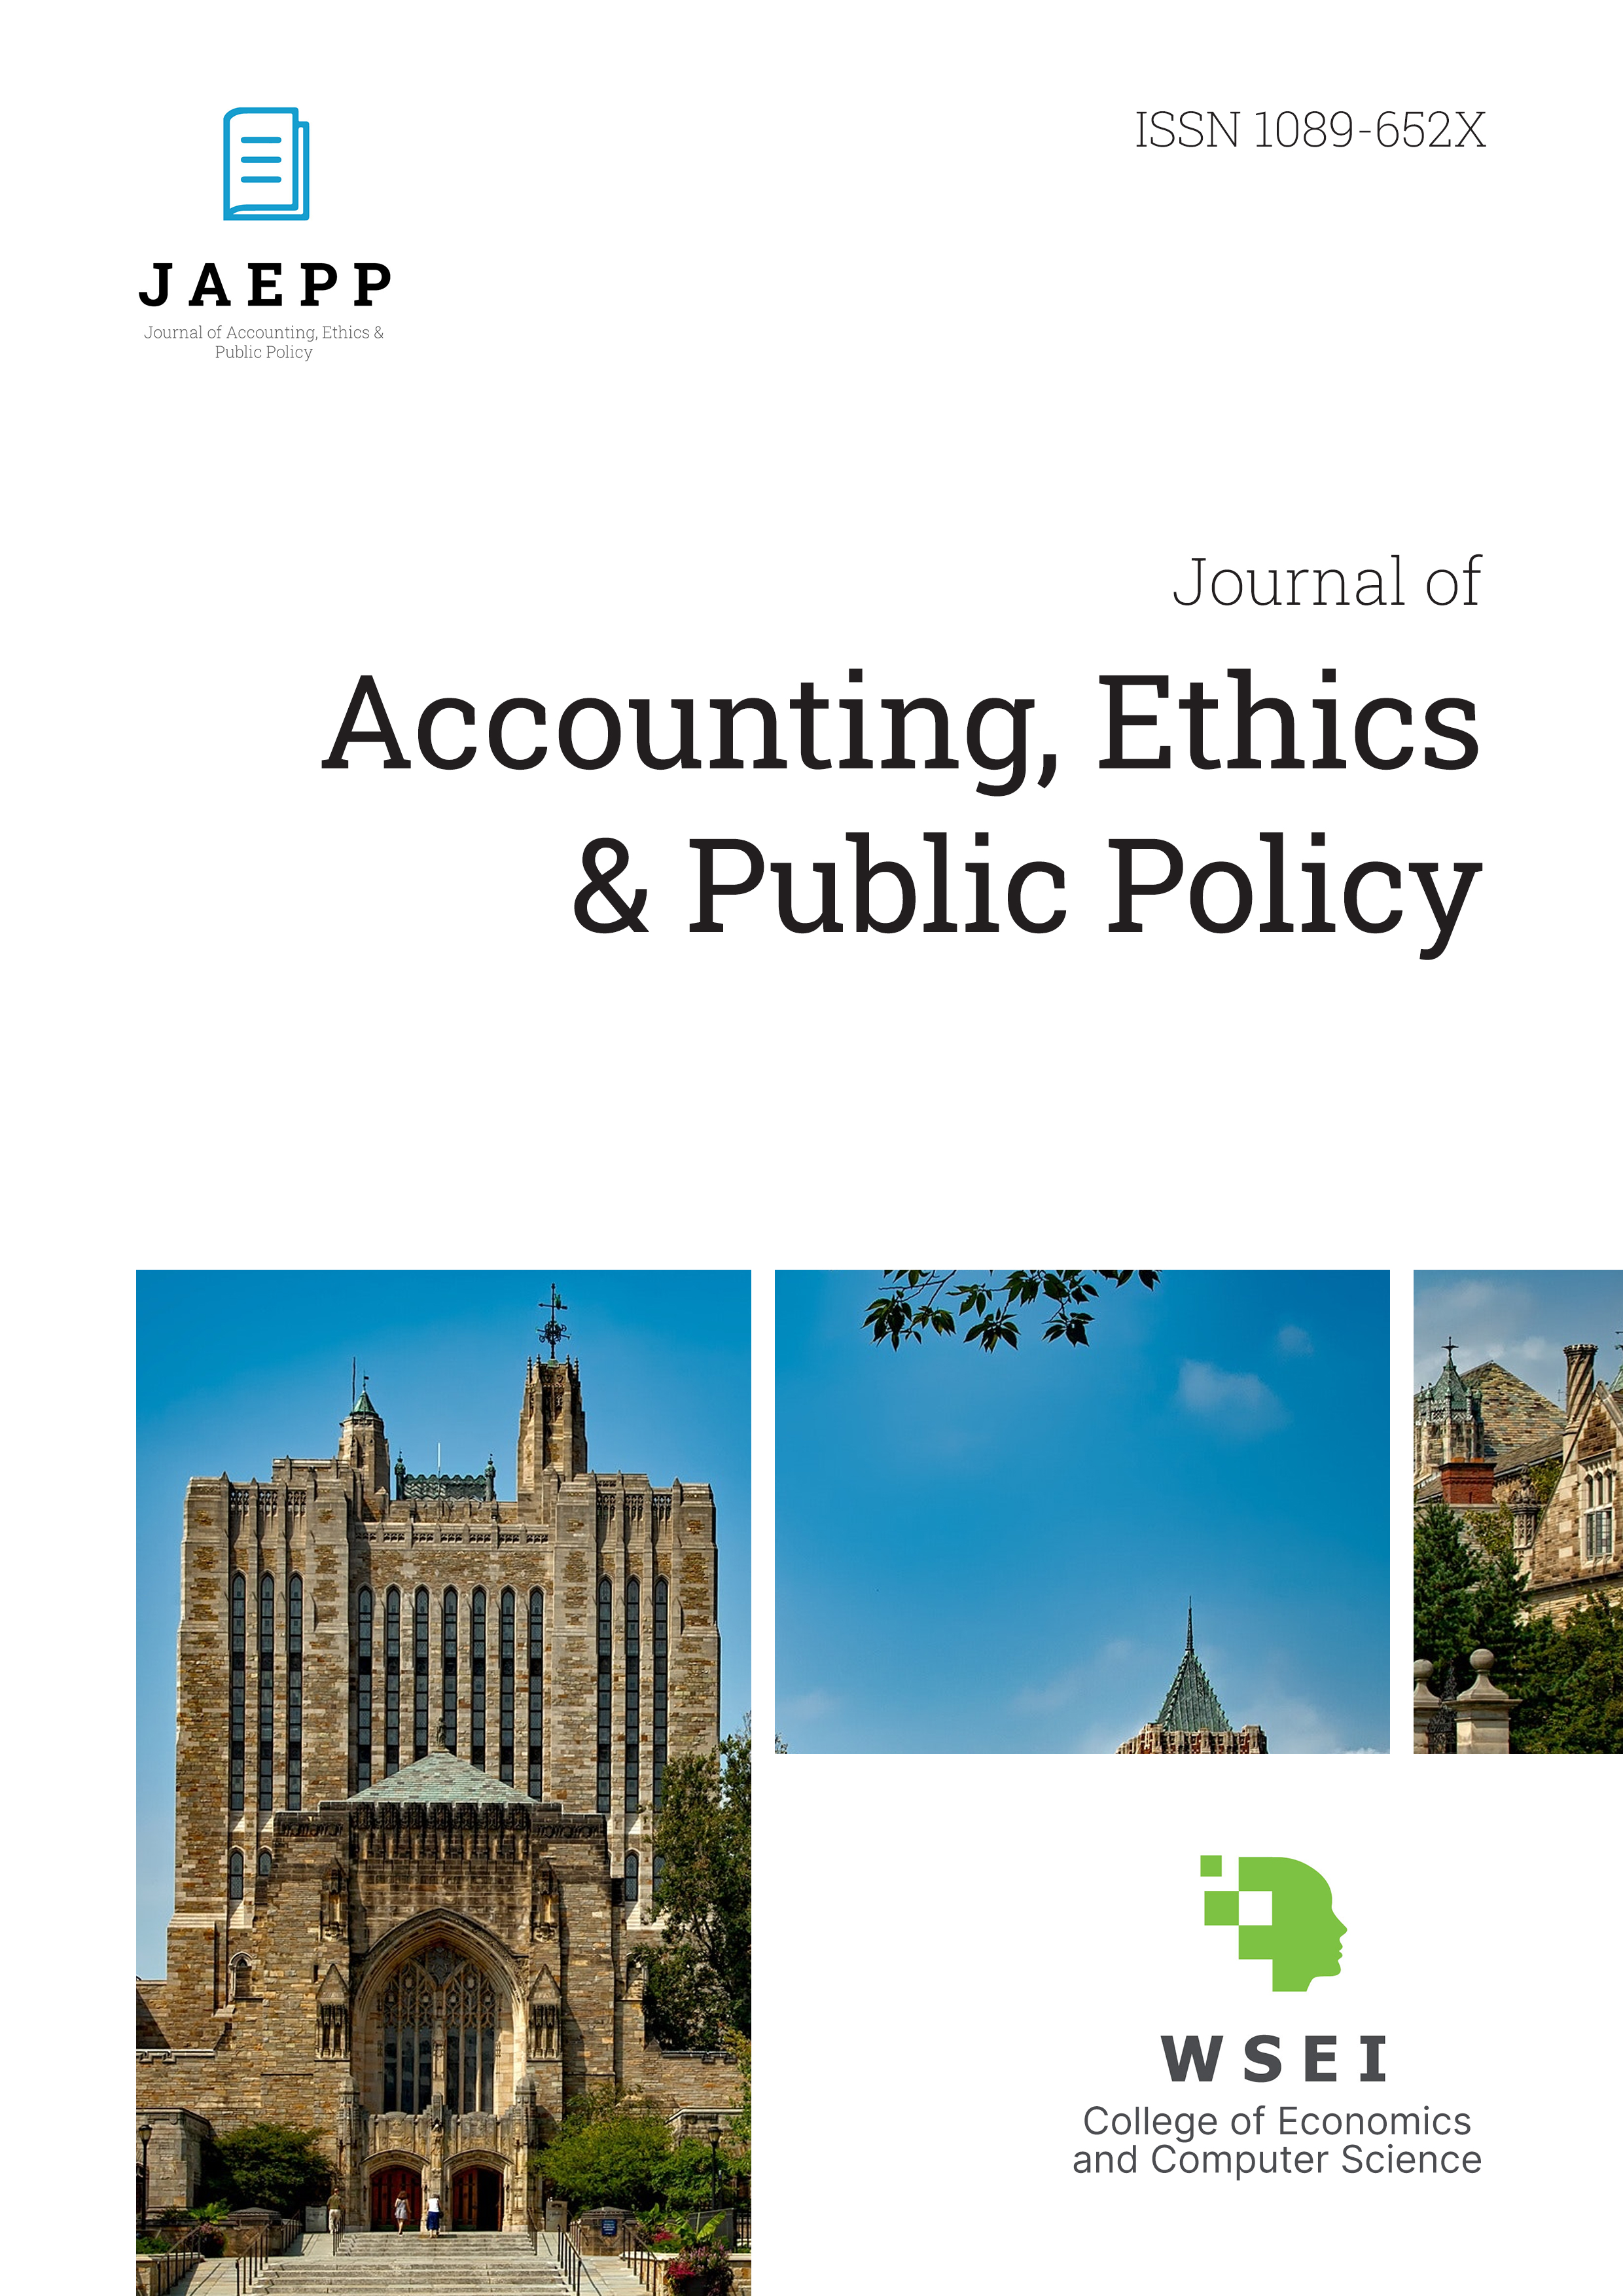 					View Vol. 18 No. 1 (2017): Journal of Accounting, Ethics & Public Policy, JAEPP
				